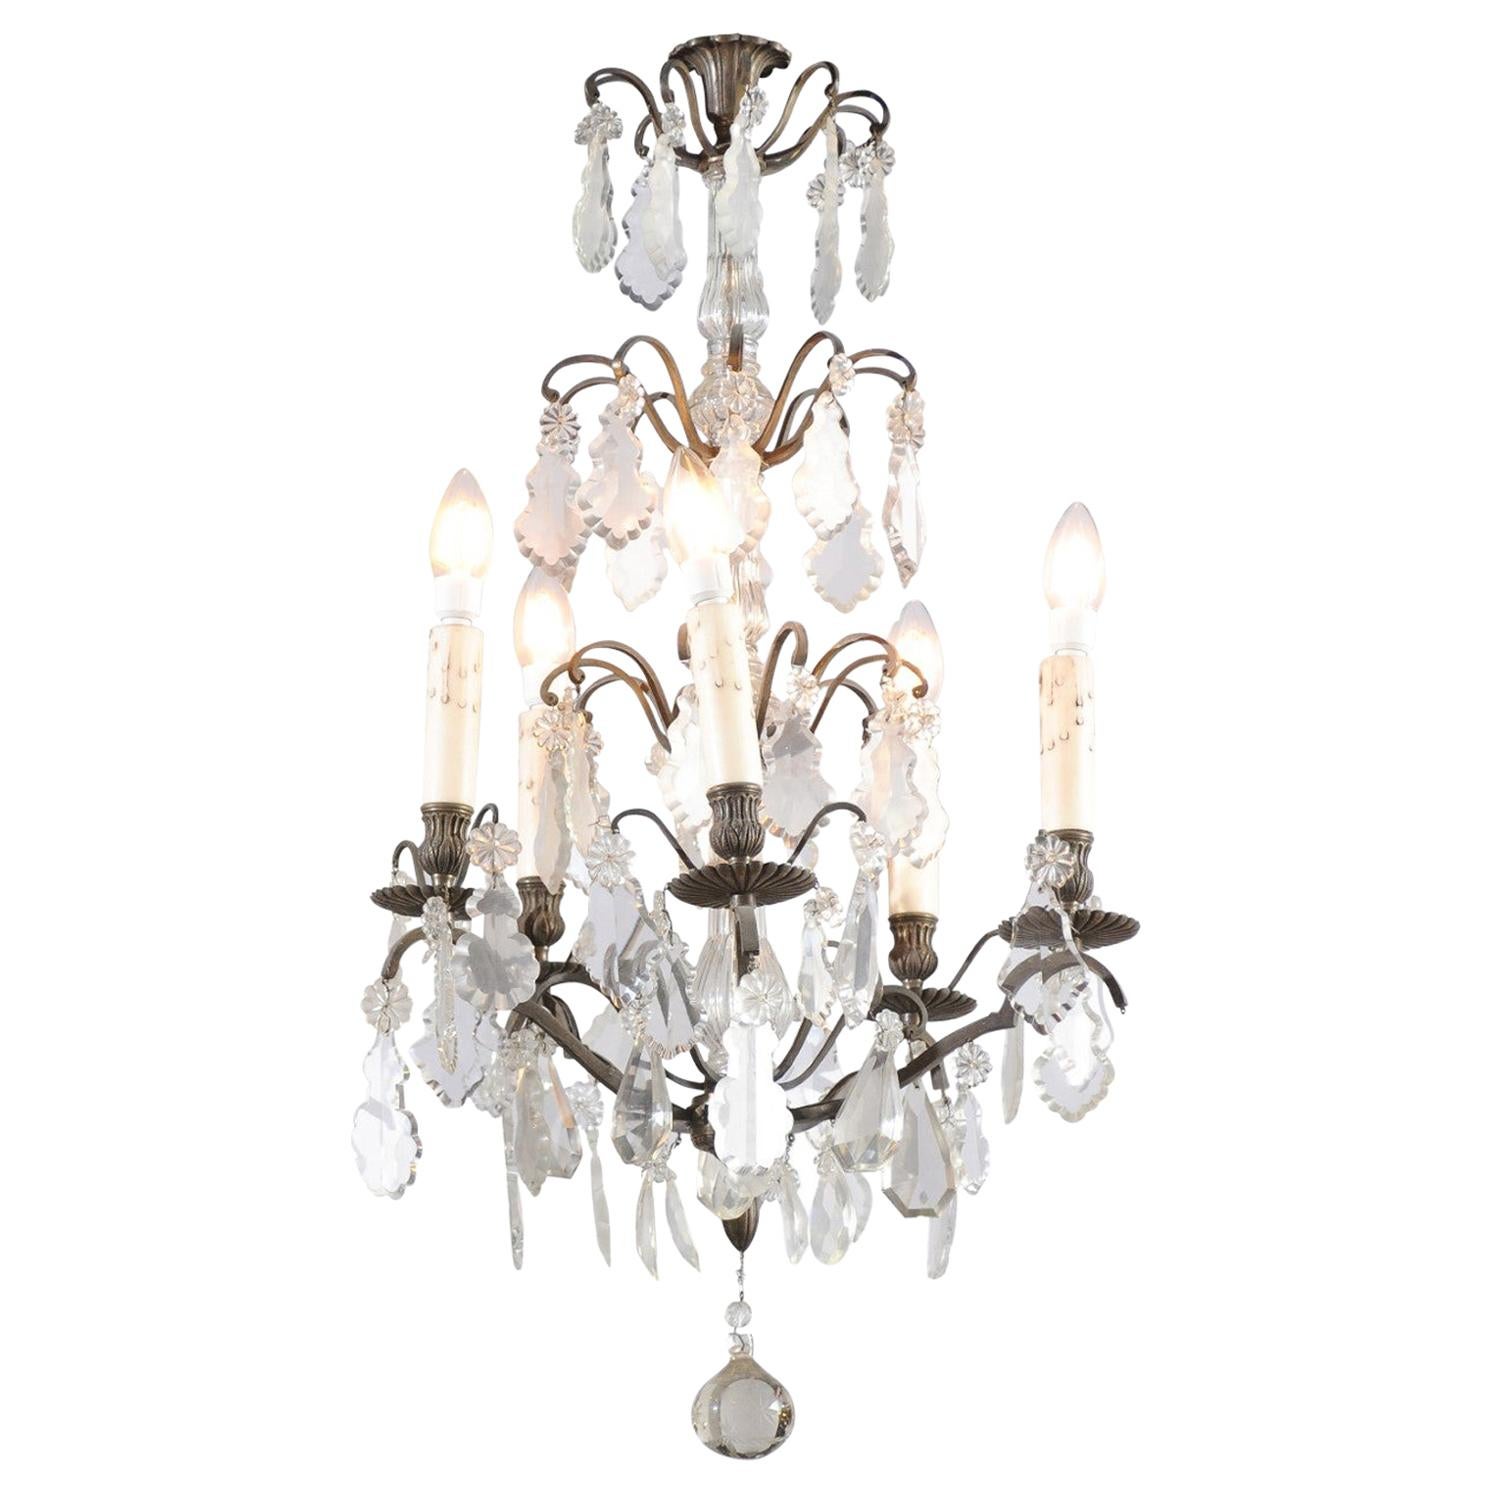 19th Century French Five-Light Iron and Crystal Chandelier with Pendeloques For Sale